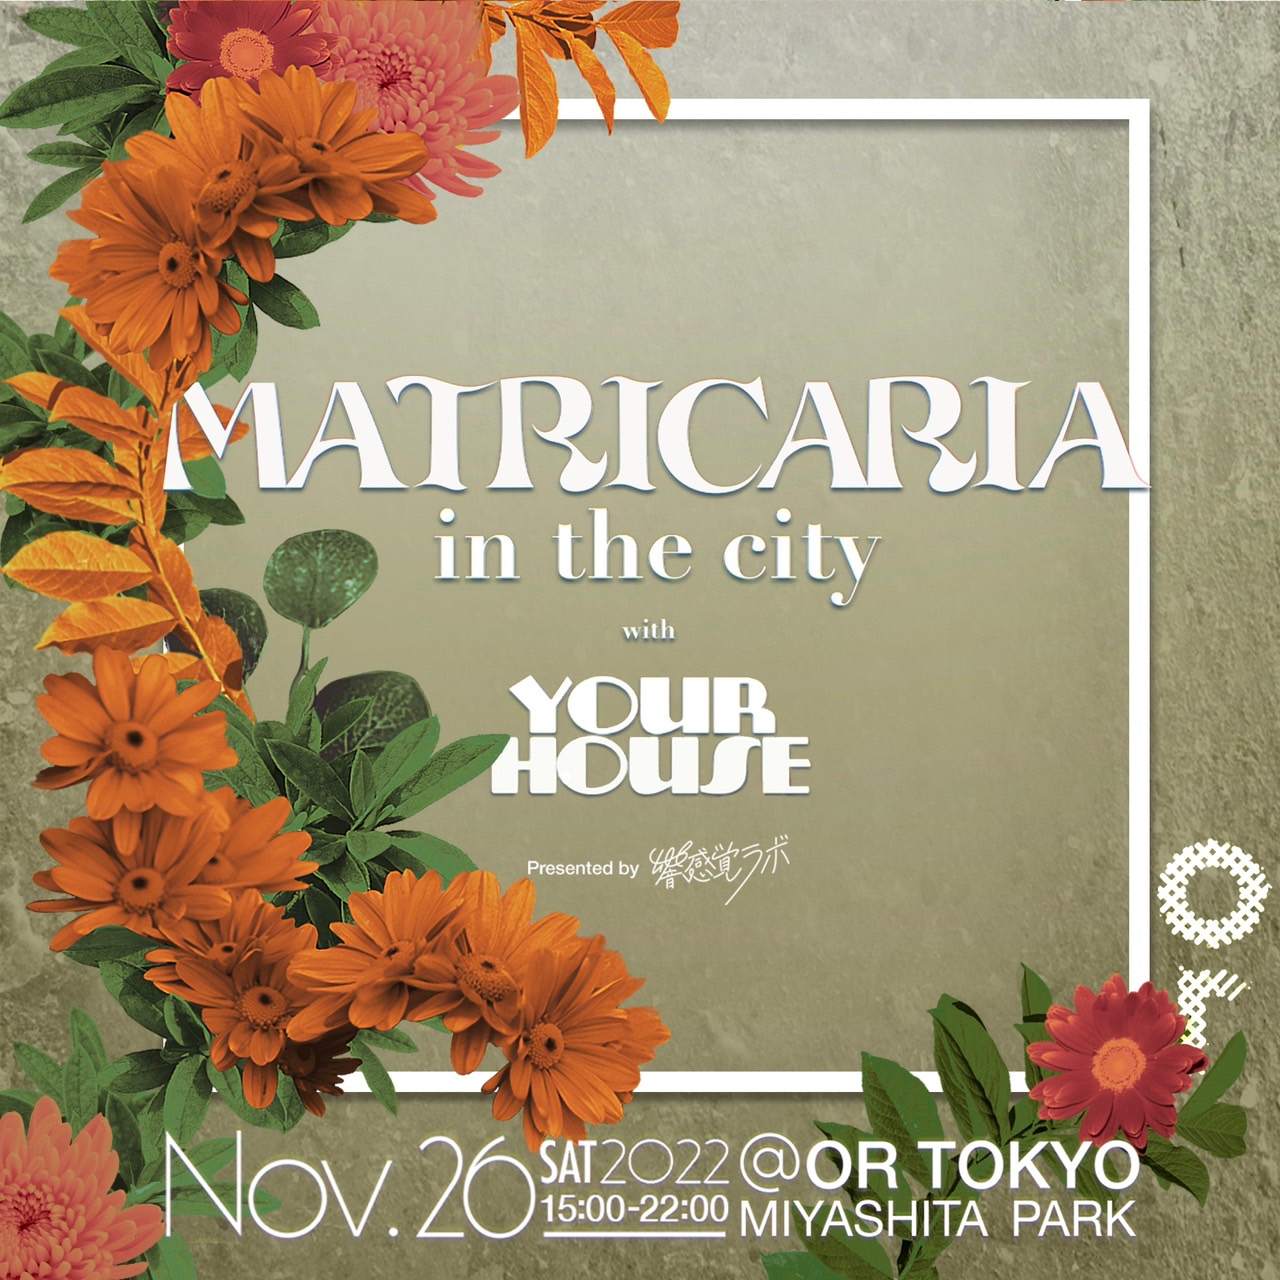 MATRICARIA in the city with YOUR HOUSE - フライヤー表